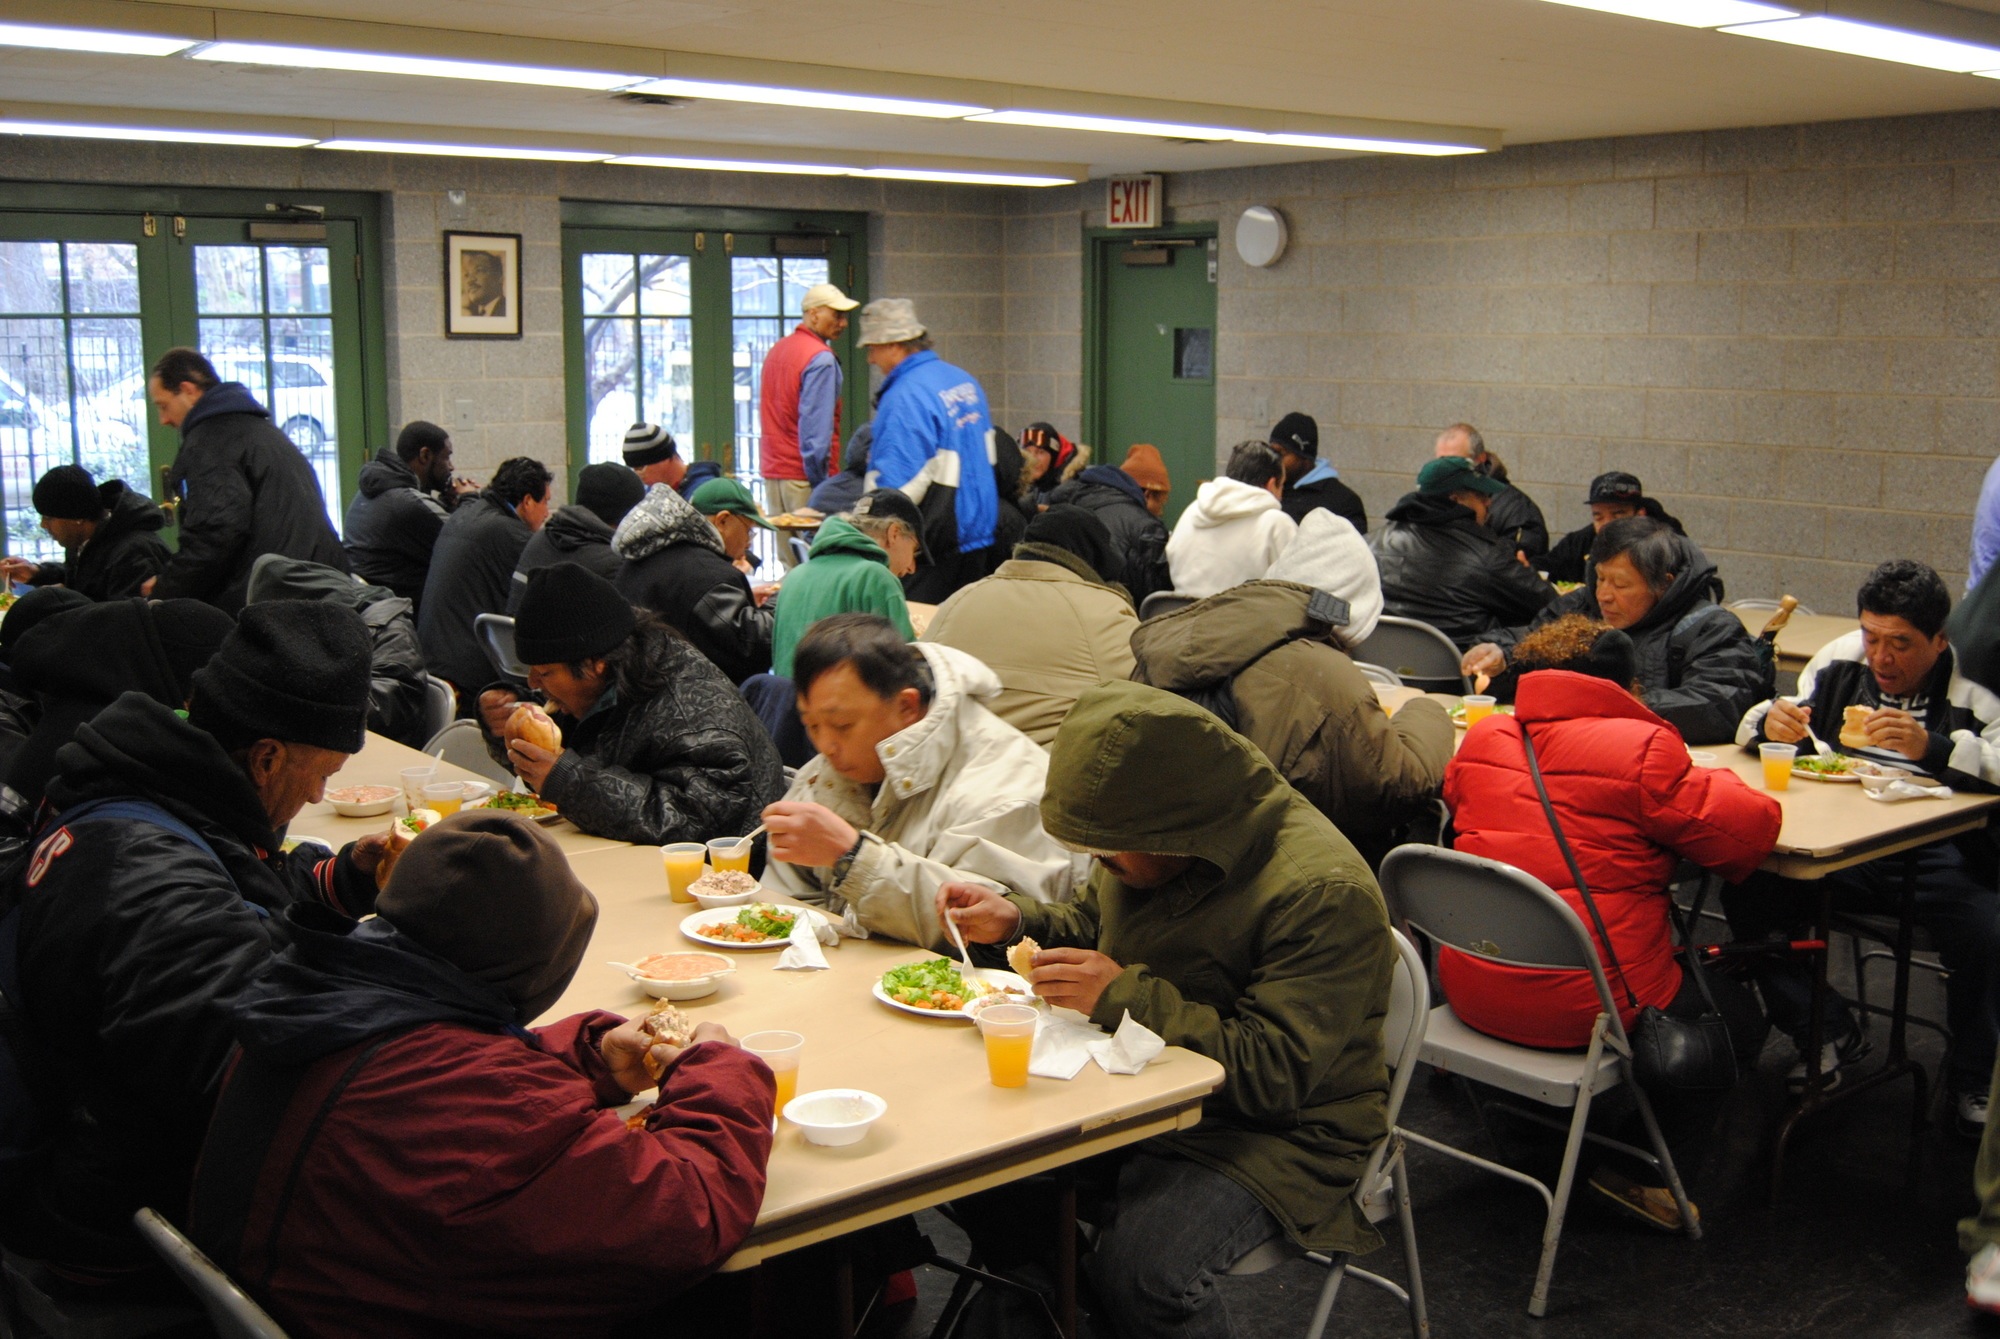 Trinity's Services and Food for the Homeless